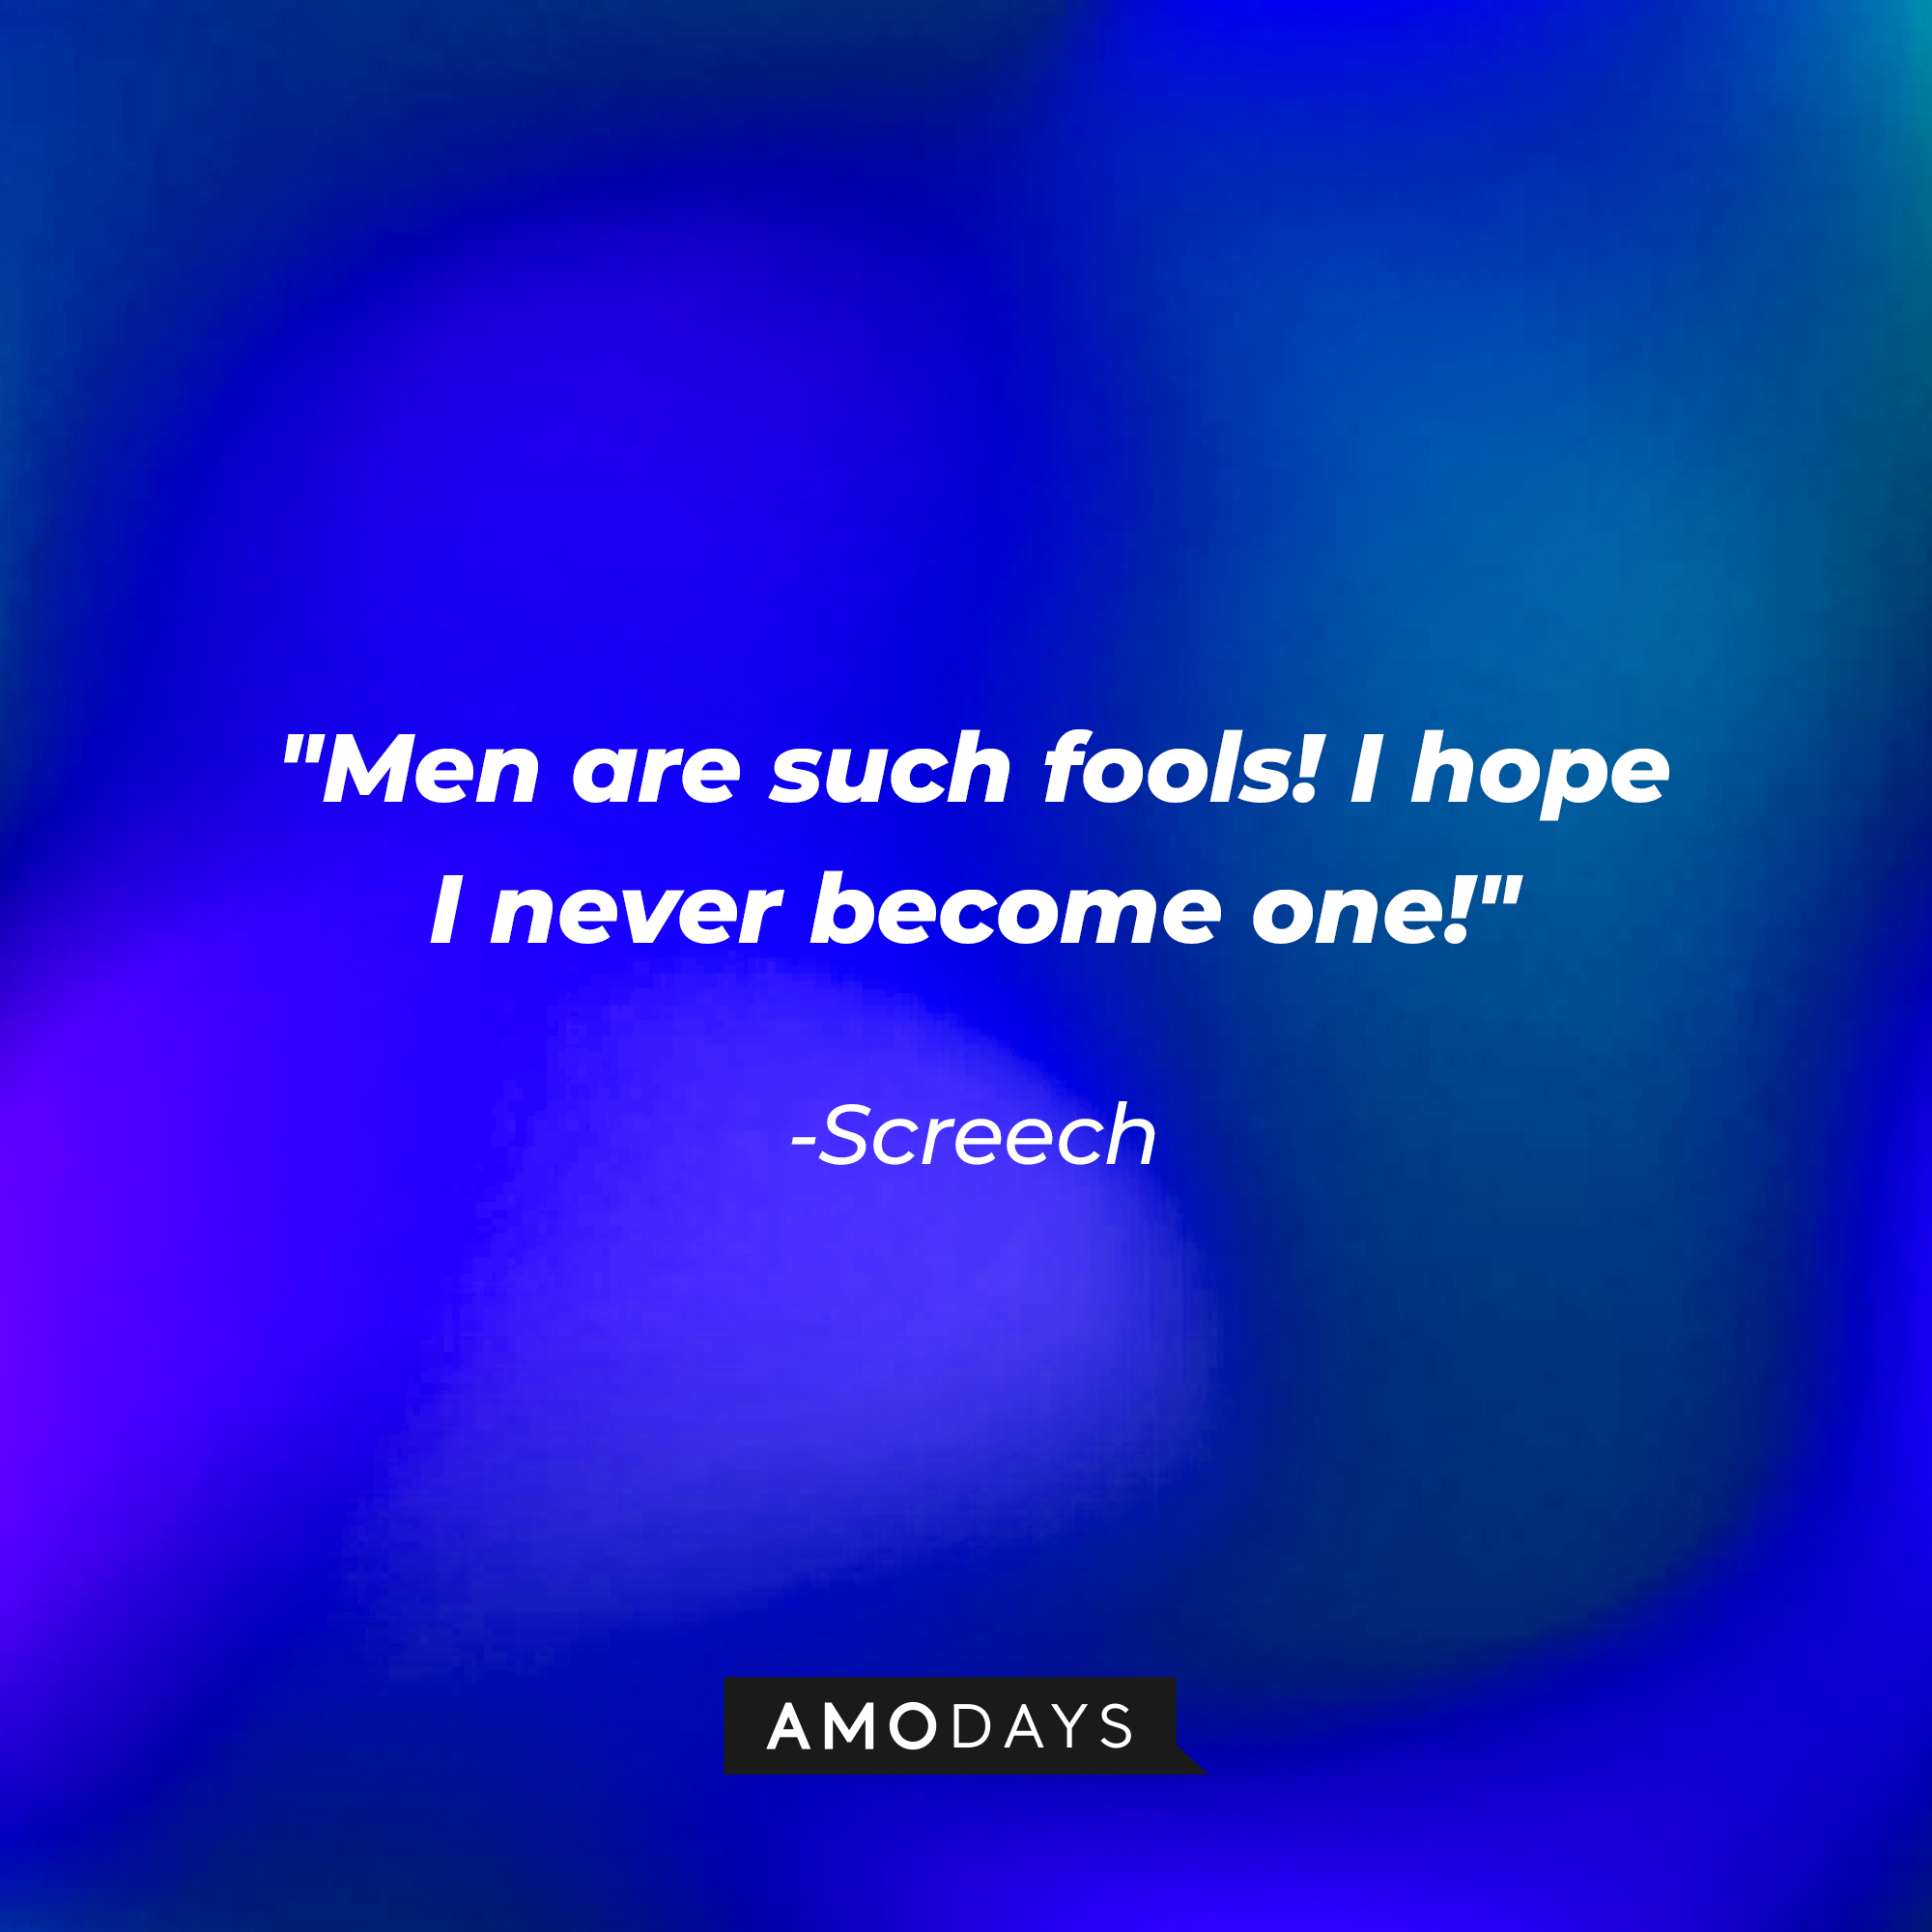 Screech with his quote, "Men are such fools! I hope I never become one!" | Source: youtube.com/SavedbytheBell